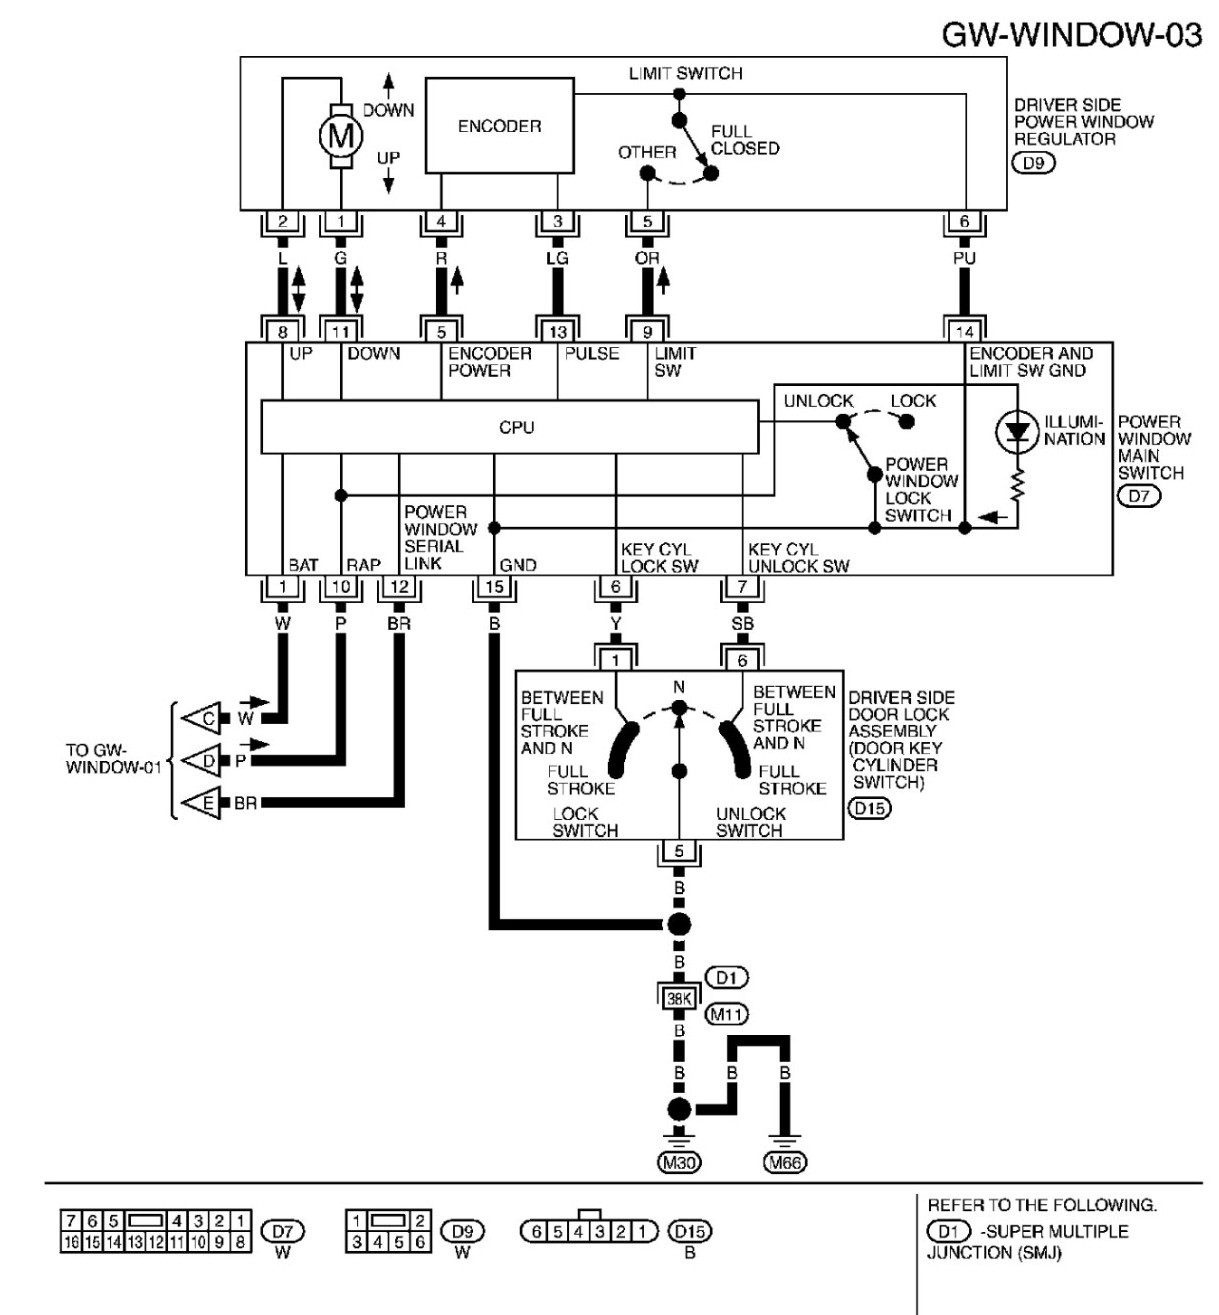 Z Second Fuse Box Diagram Nissan Wiring Diagramz Database I Need A For The